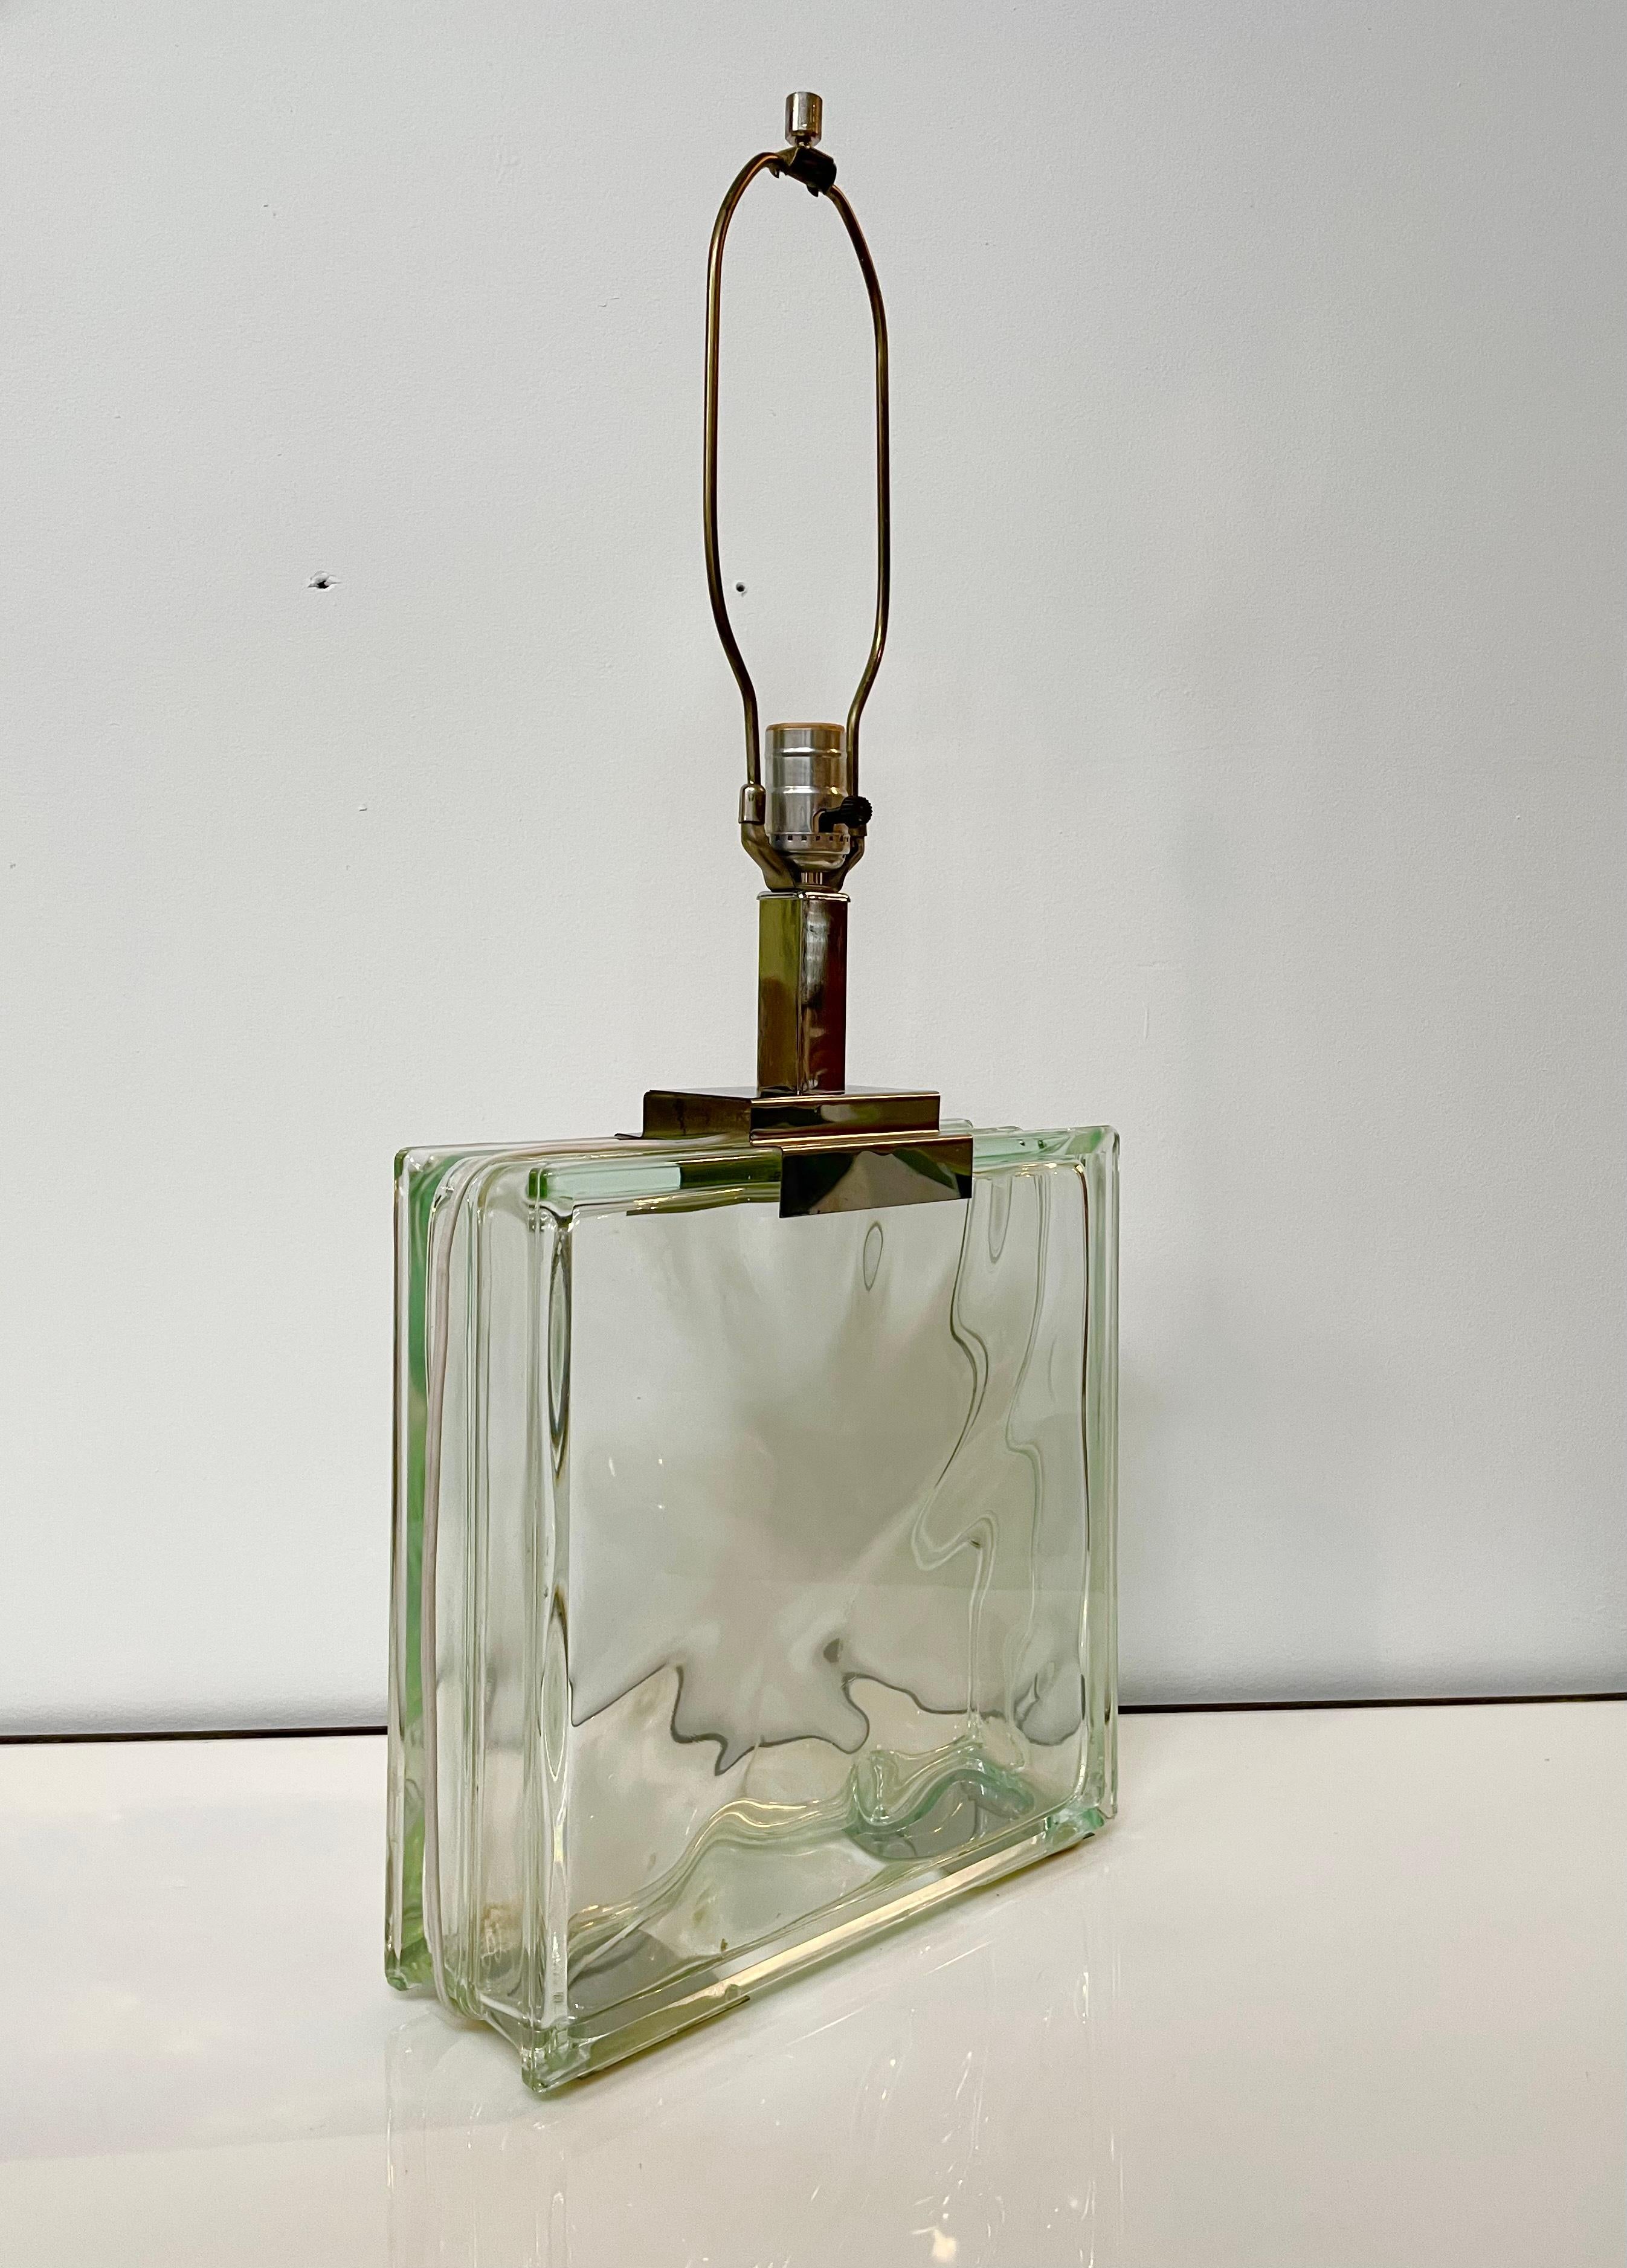 A nicely made table lamp produced by Raymor circa 1970's. It features a large glass block base with chrome details. Wiring is good and it's tested and working. Shade not included, just the lamp base.